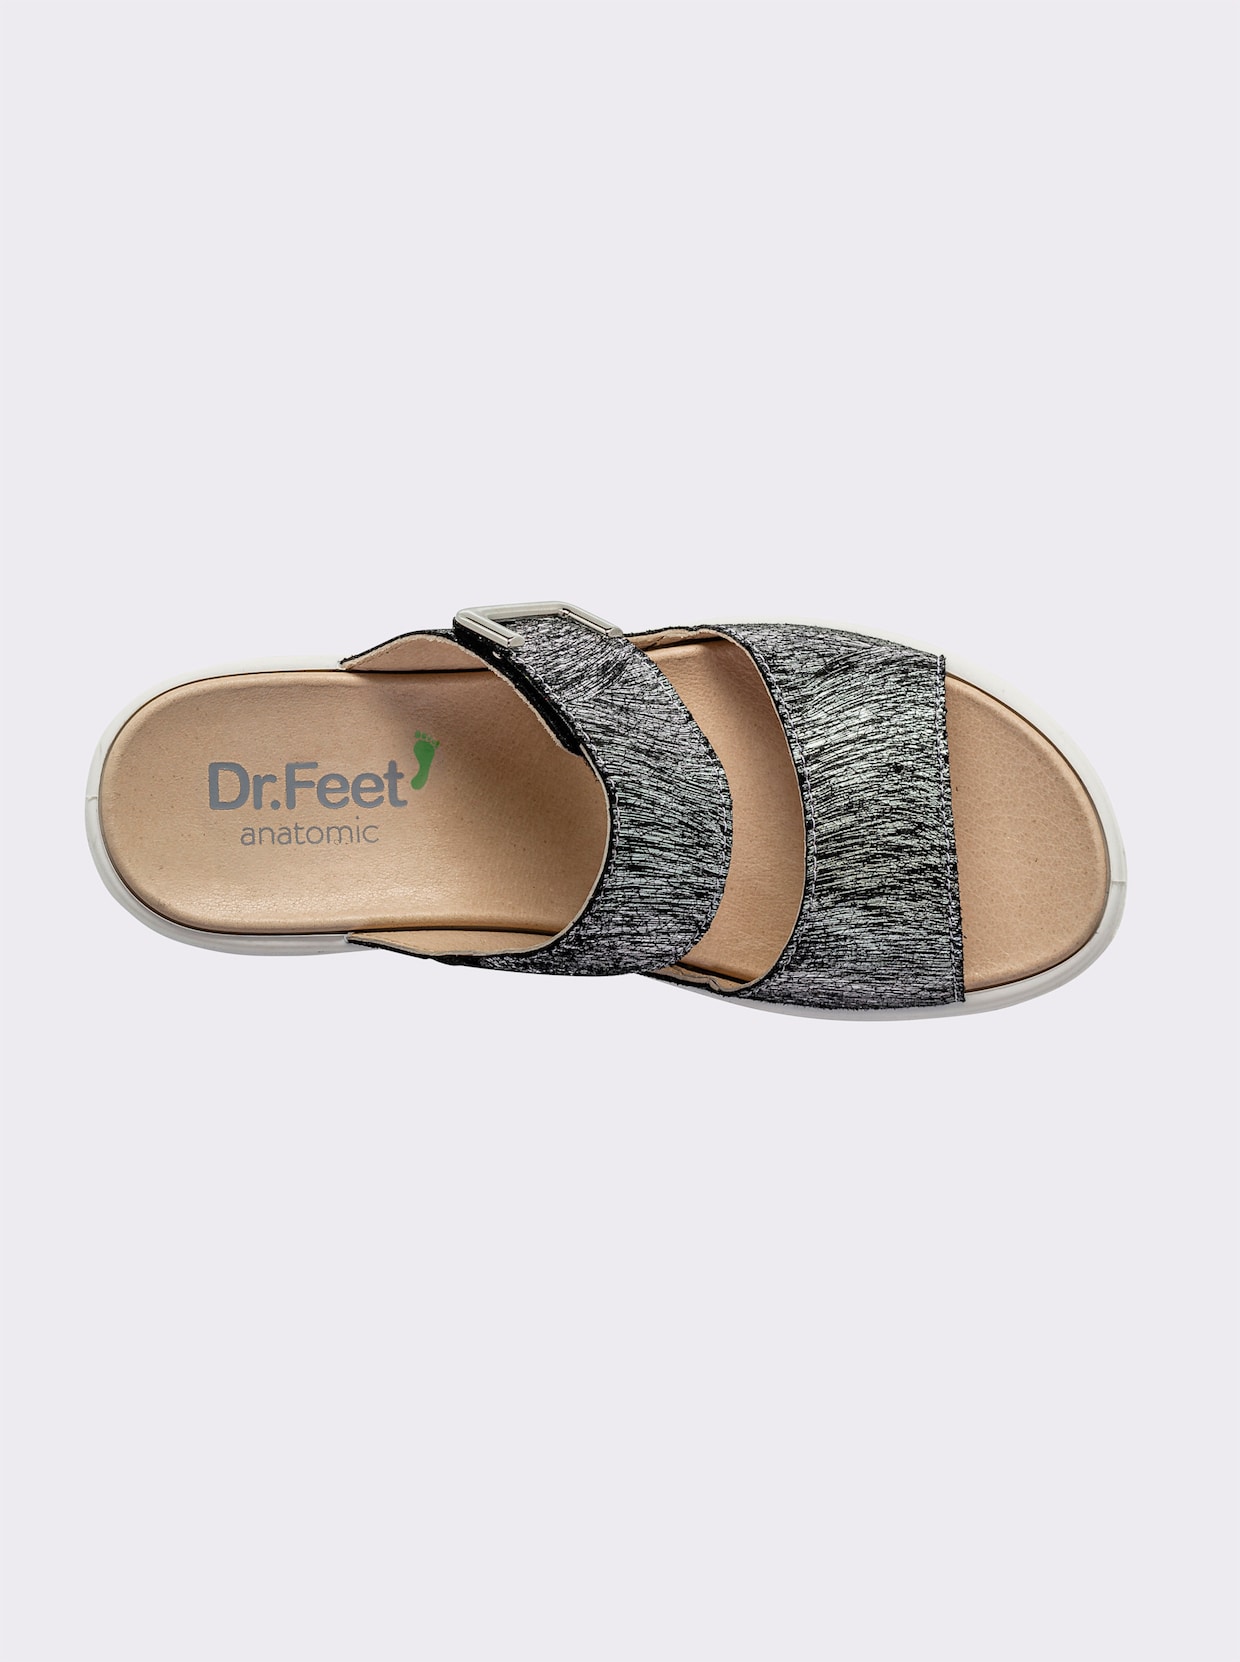 Dr. Feet Mules - anthracite